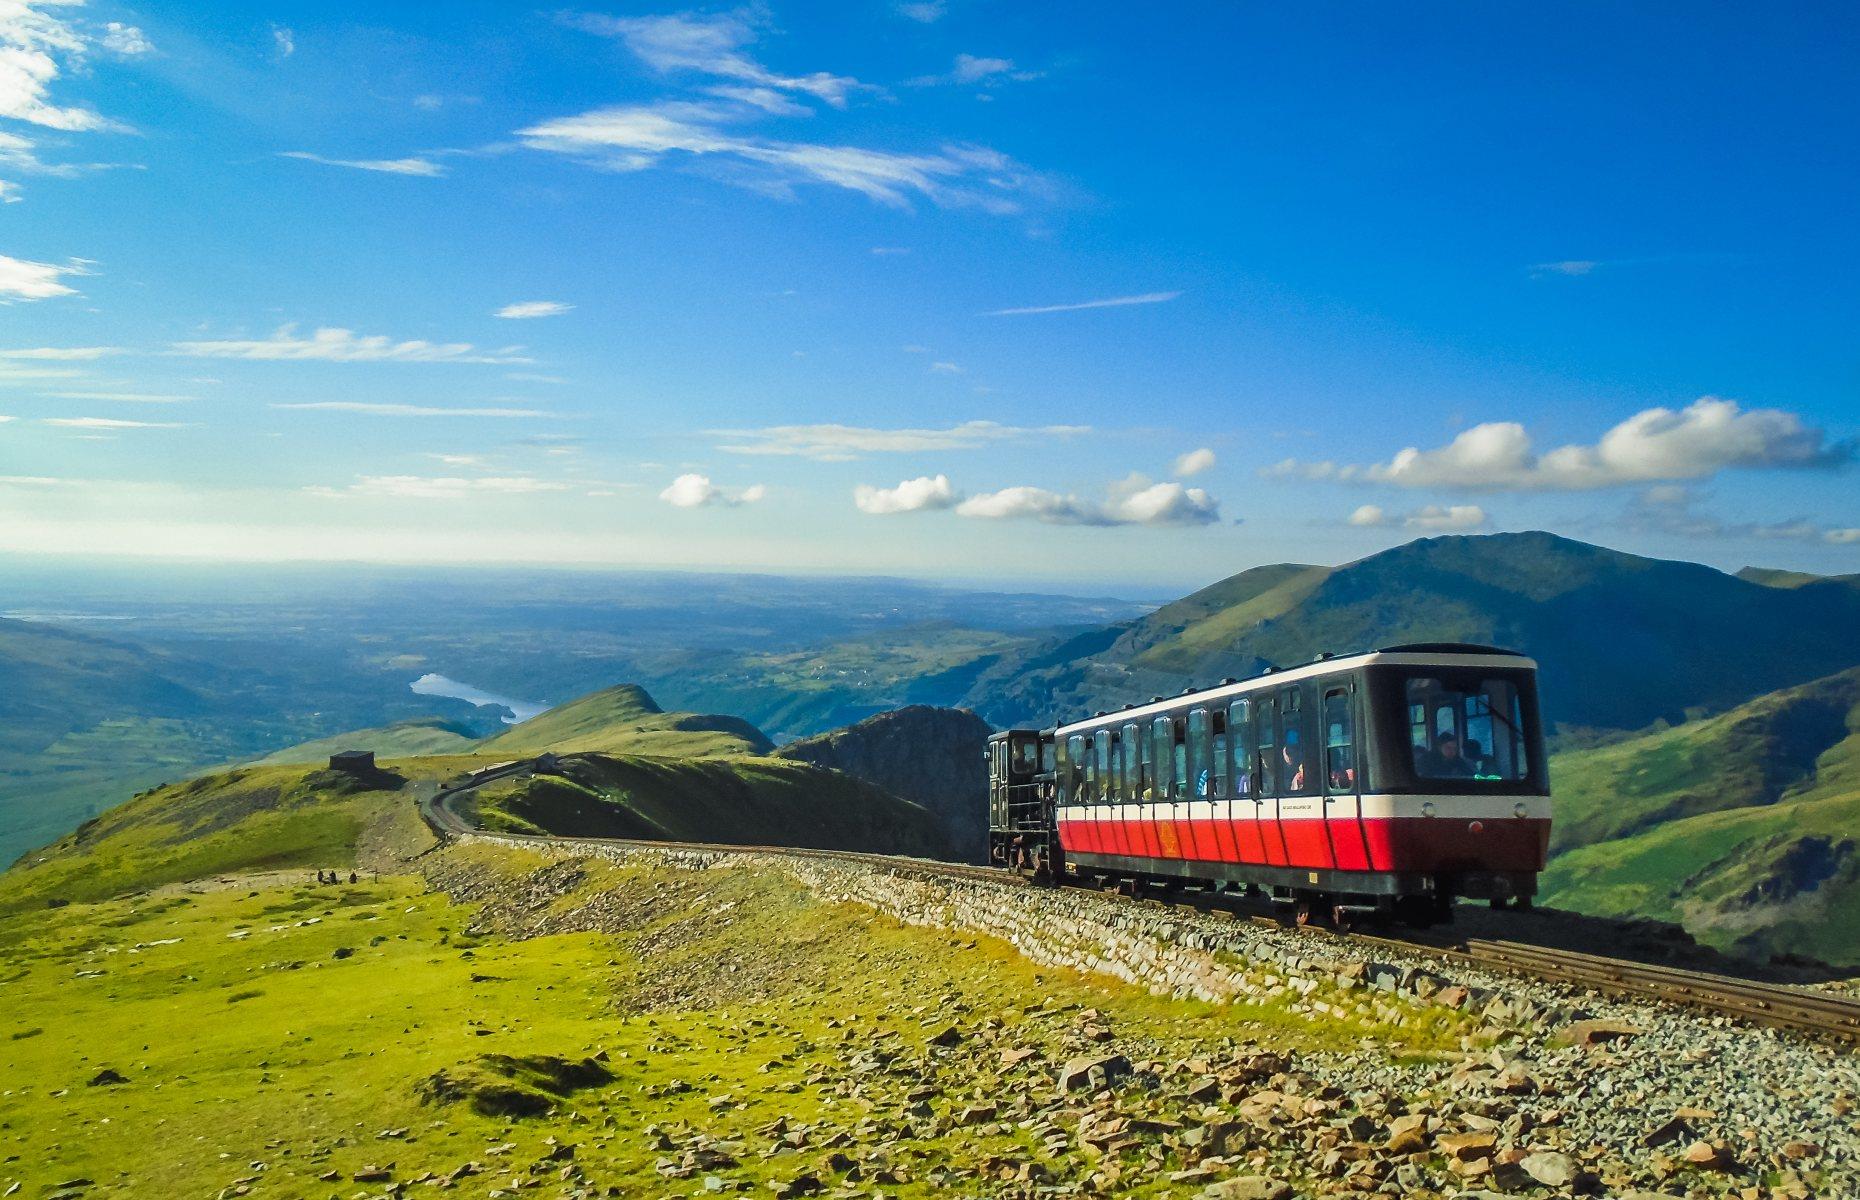 <p>Travelling up and down the highest peak in England and Wales, the <a href="https://snowdonrailway.co.uk/">Snowdon Mountain Railway</a> has been serving passengers since 1896. From the town of Llanberis, the steam train climbs four miles (6.4km) to the rocky summit of Snowdon through some of Wales’ most jaw-dropping scenery. Soaring 3,560 feet high (1,075m) at its peak, the journey provides incredible panoramic views across Snowdonia.</p>  <p><a href="https://www.loveexploring.com/gallerylist/72078/best-british-tourist-attractions"><strong>Discover more of the best British tourist attractions</strong></a></p>